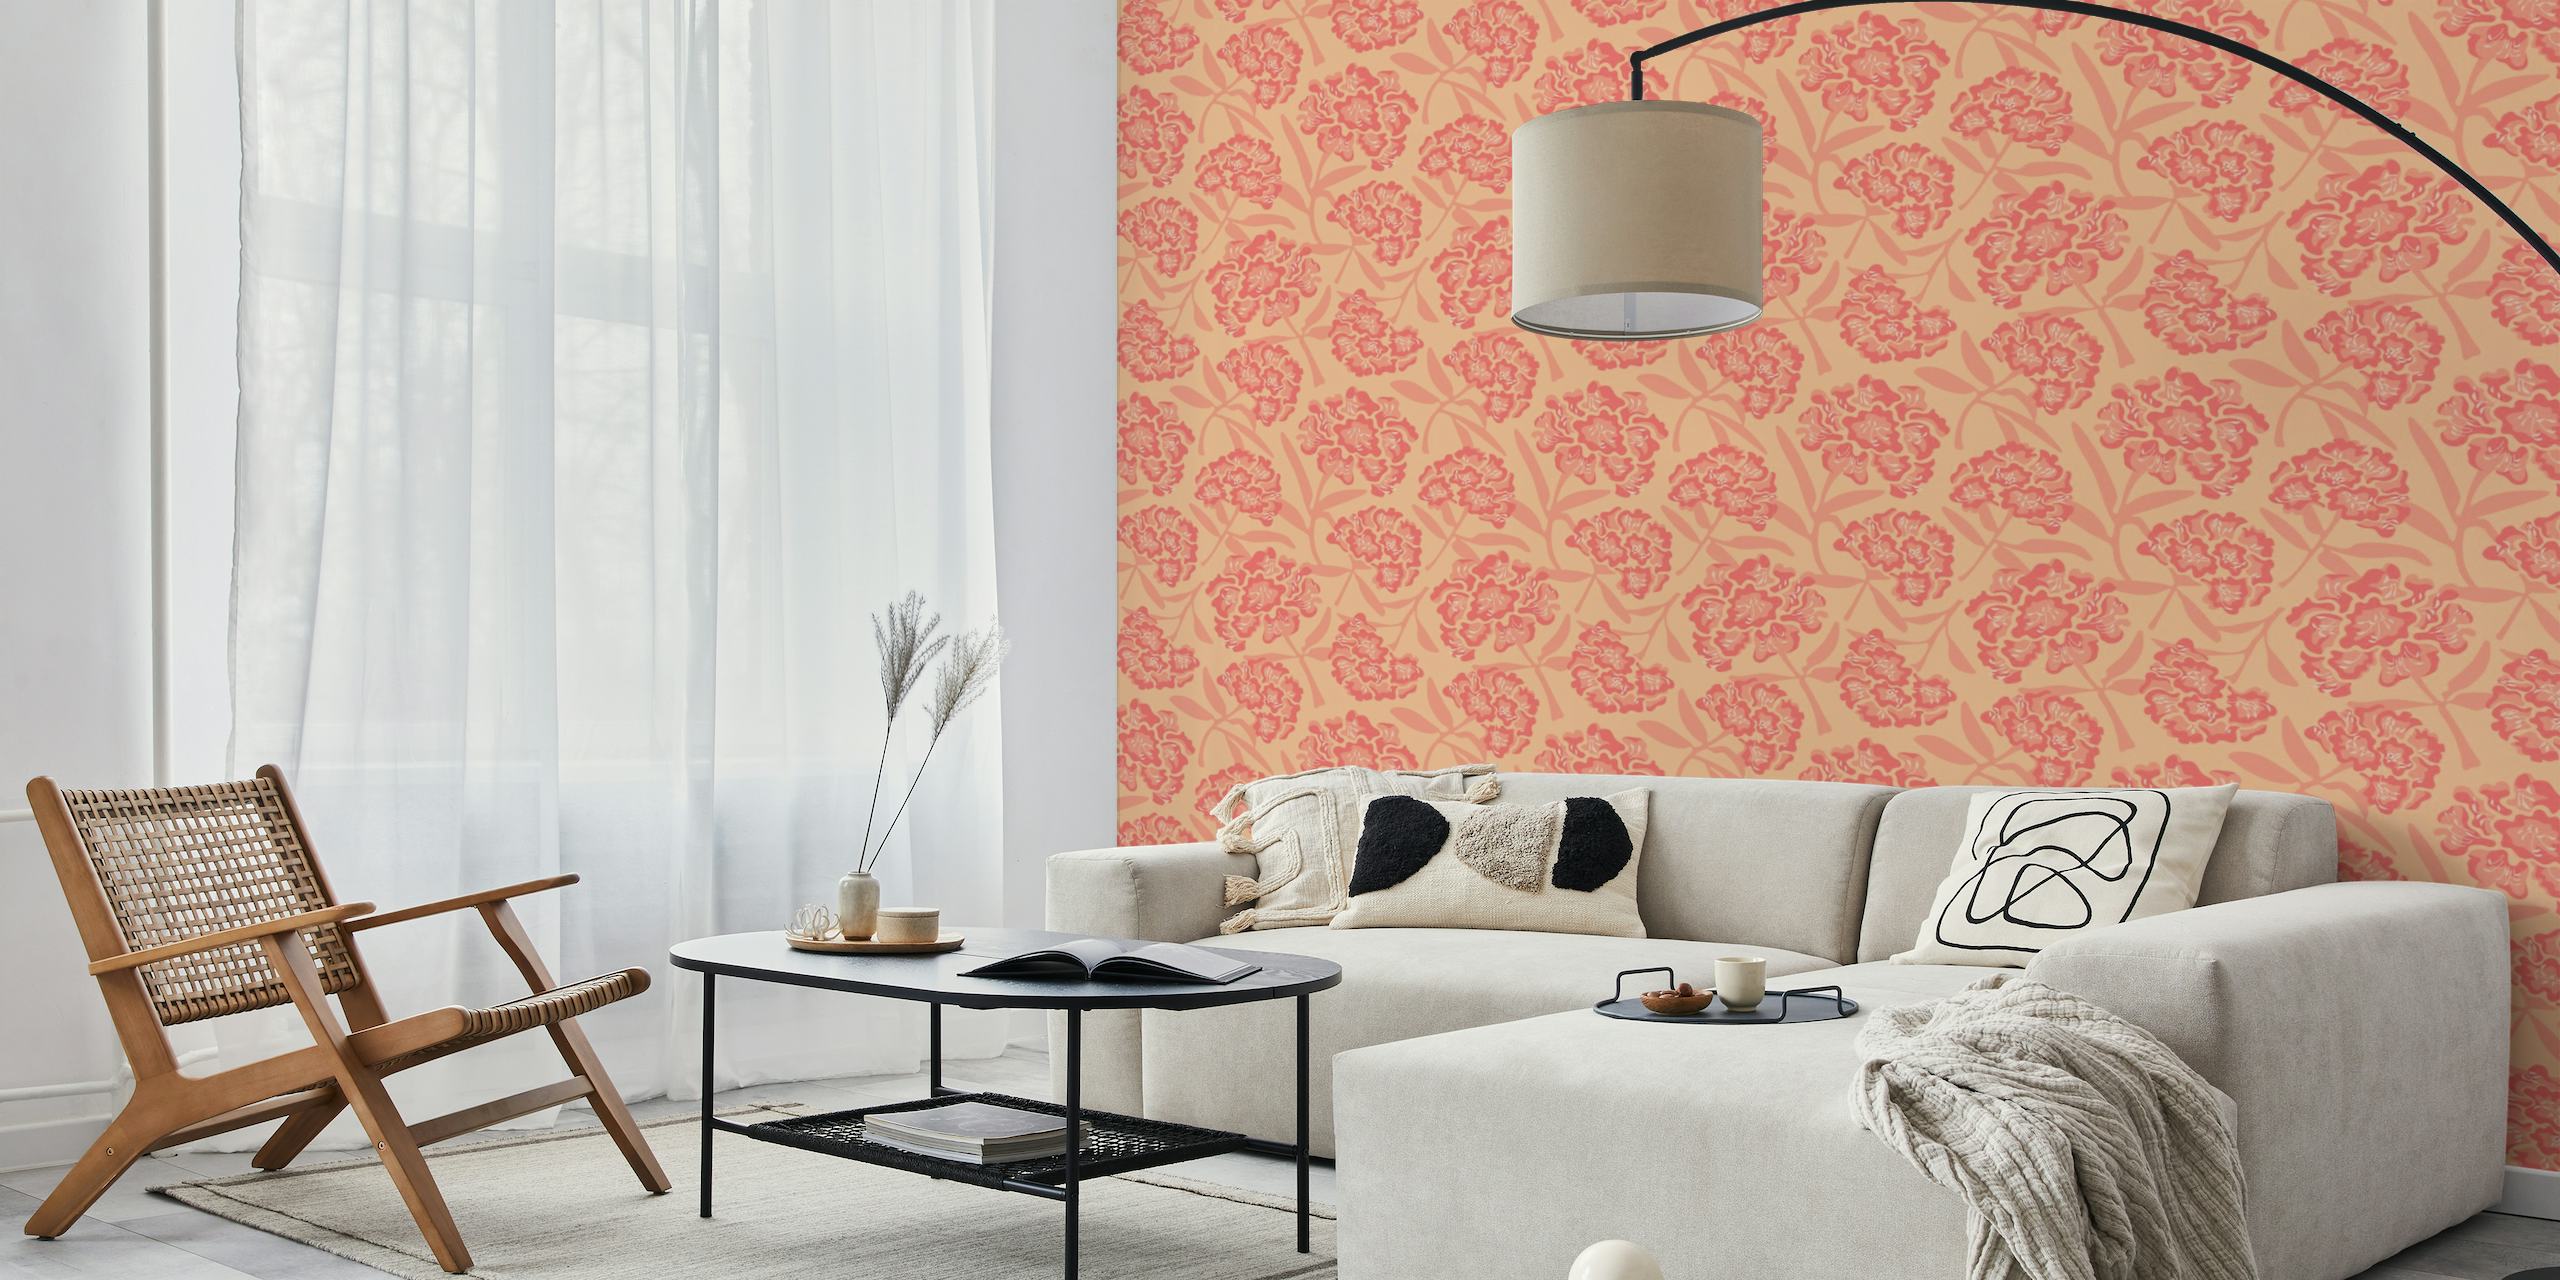 RHODODENDRONS Retro Floral Orange Peach Large wallpaper